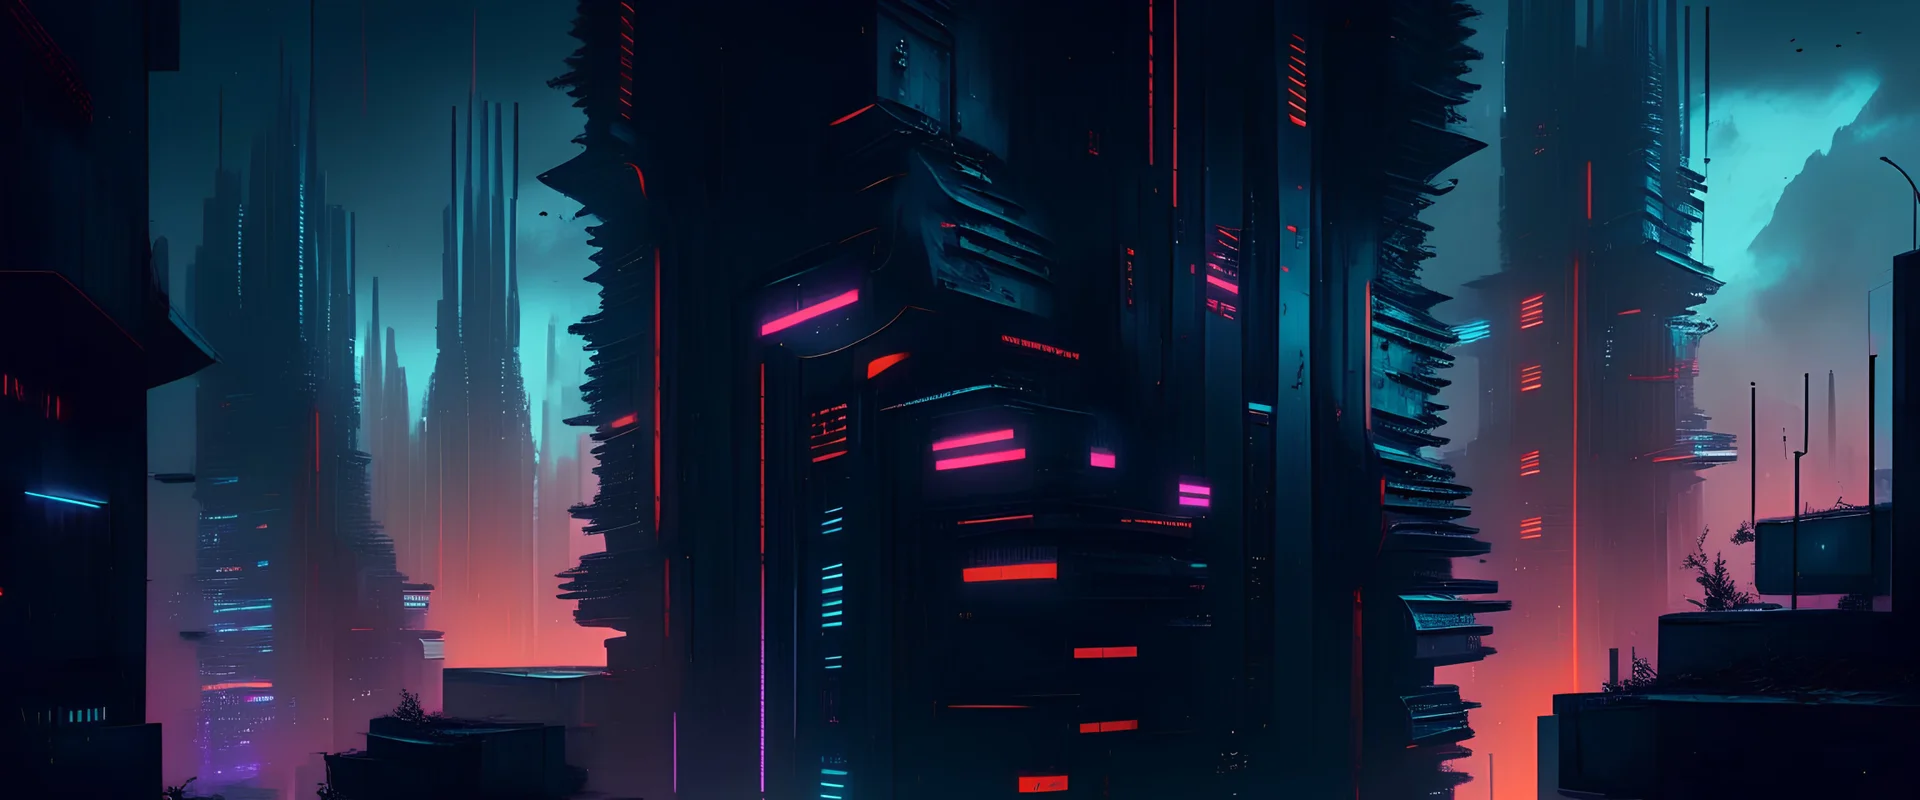 Cyberpunk, high quality, background Image, many high rise buildings